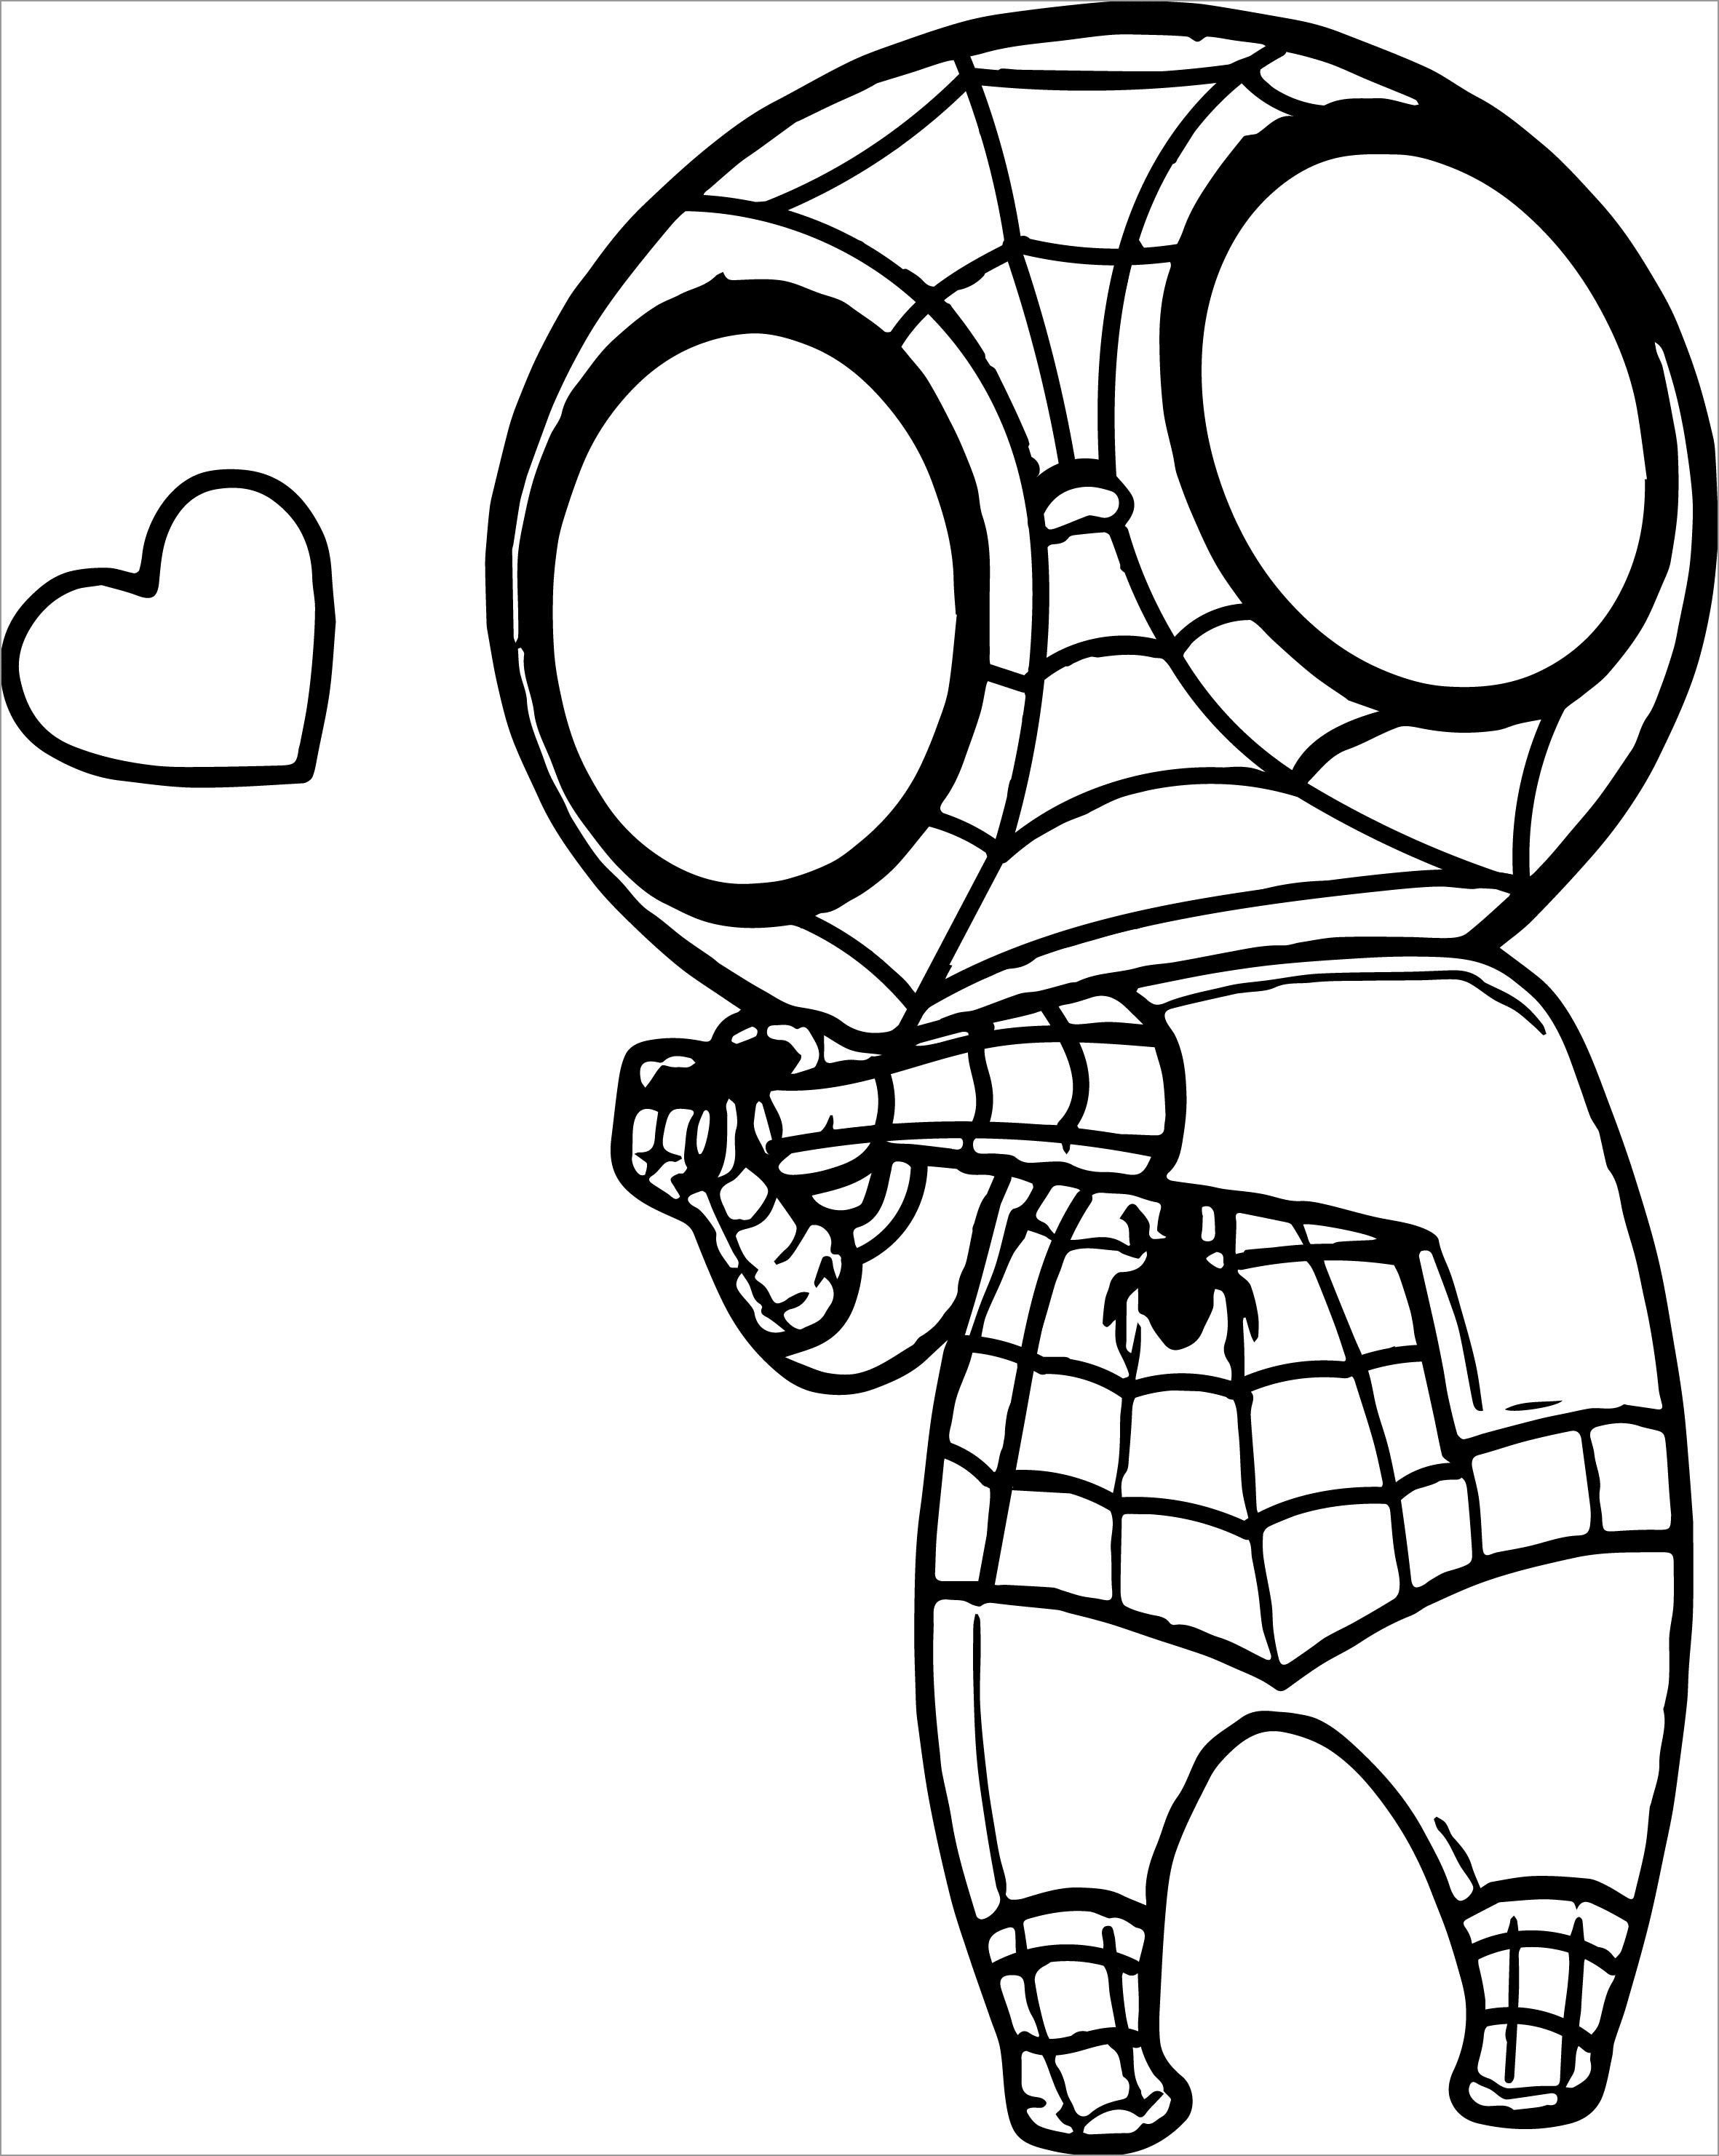 Chibi Spiderman Coloring Page for Kids   ColoringBay